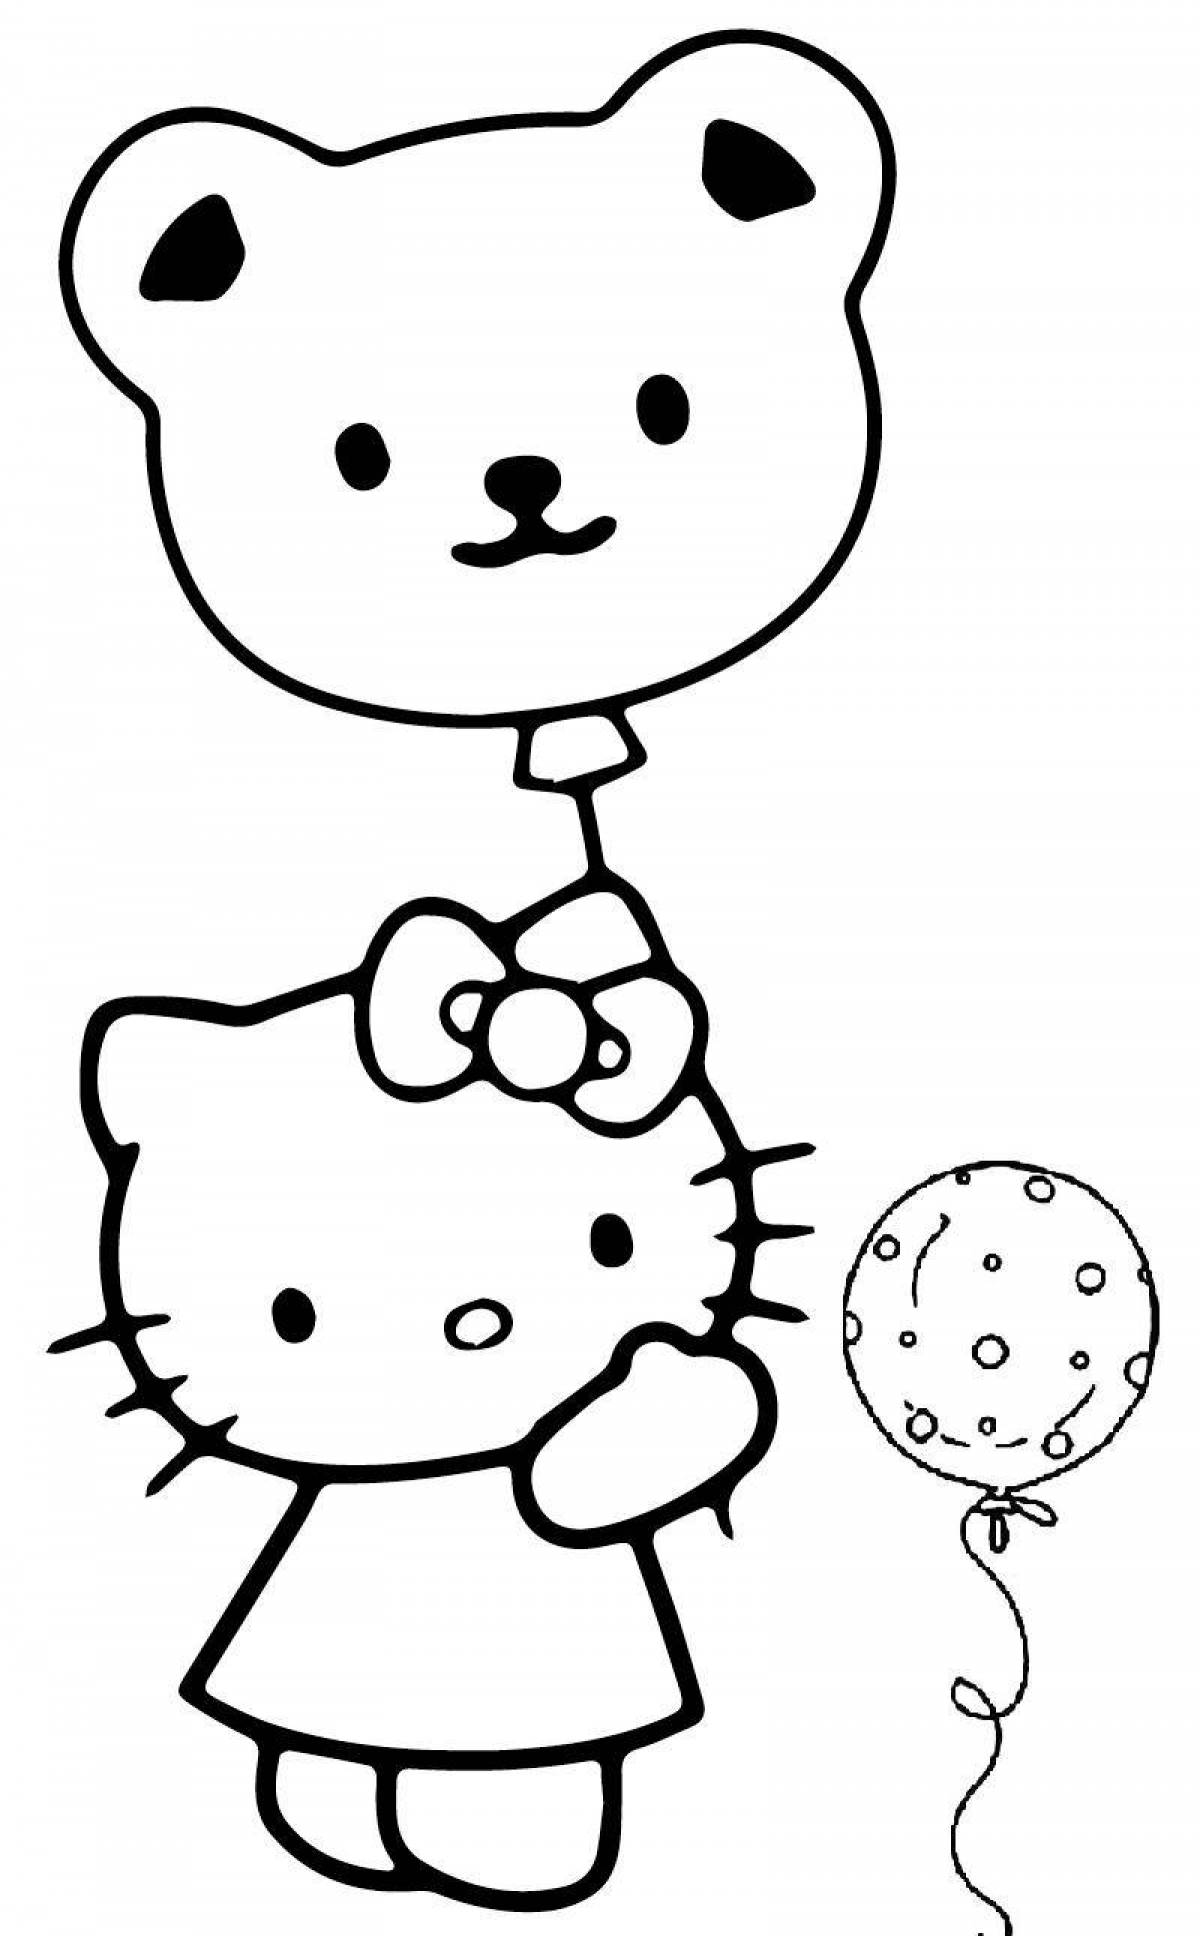 Dazzling hello kitty coloring in a dress